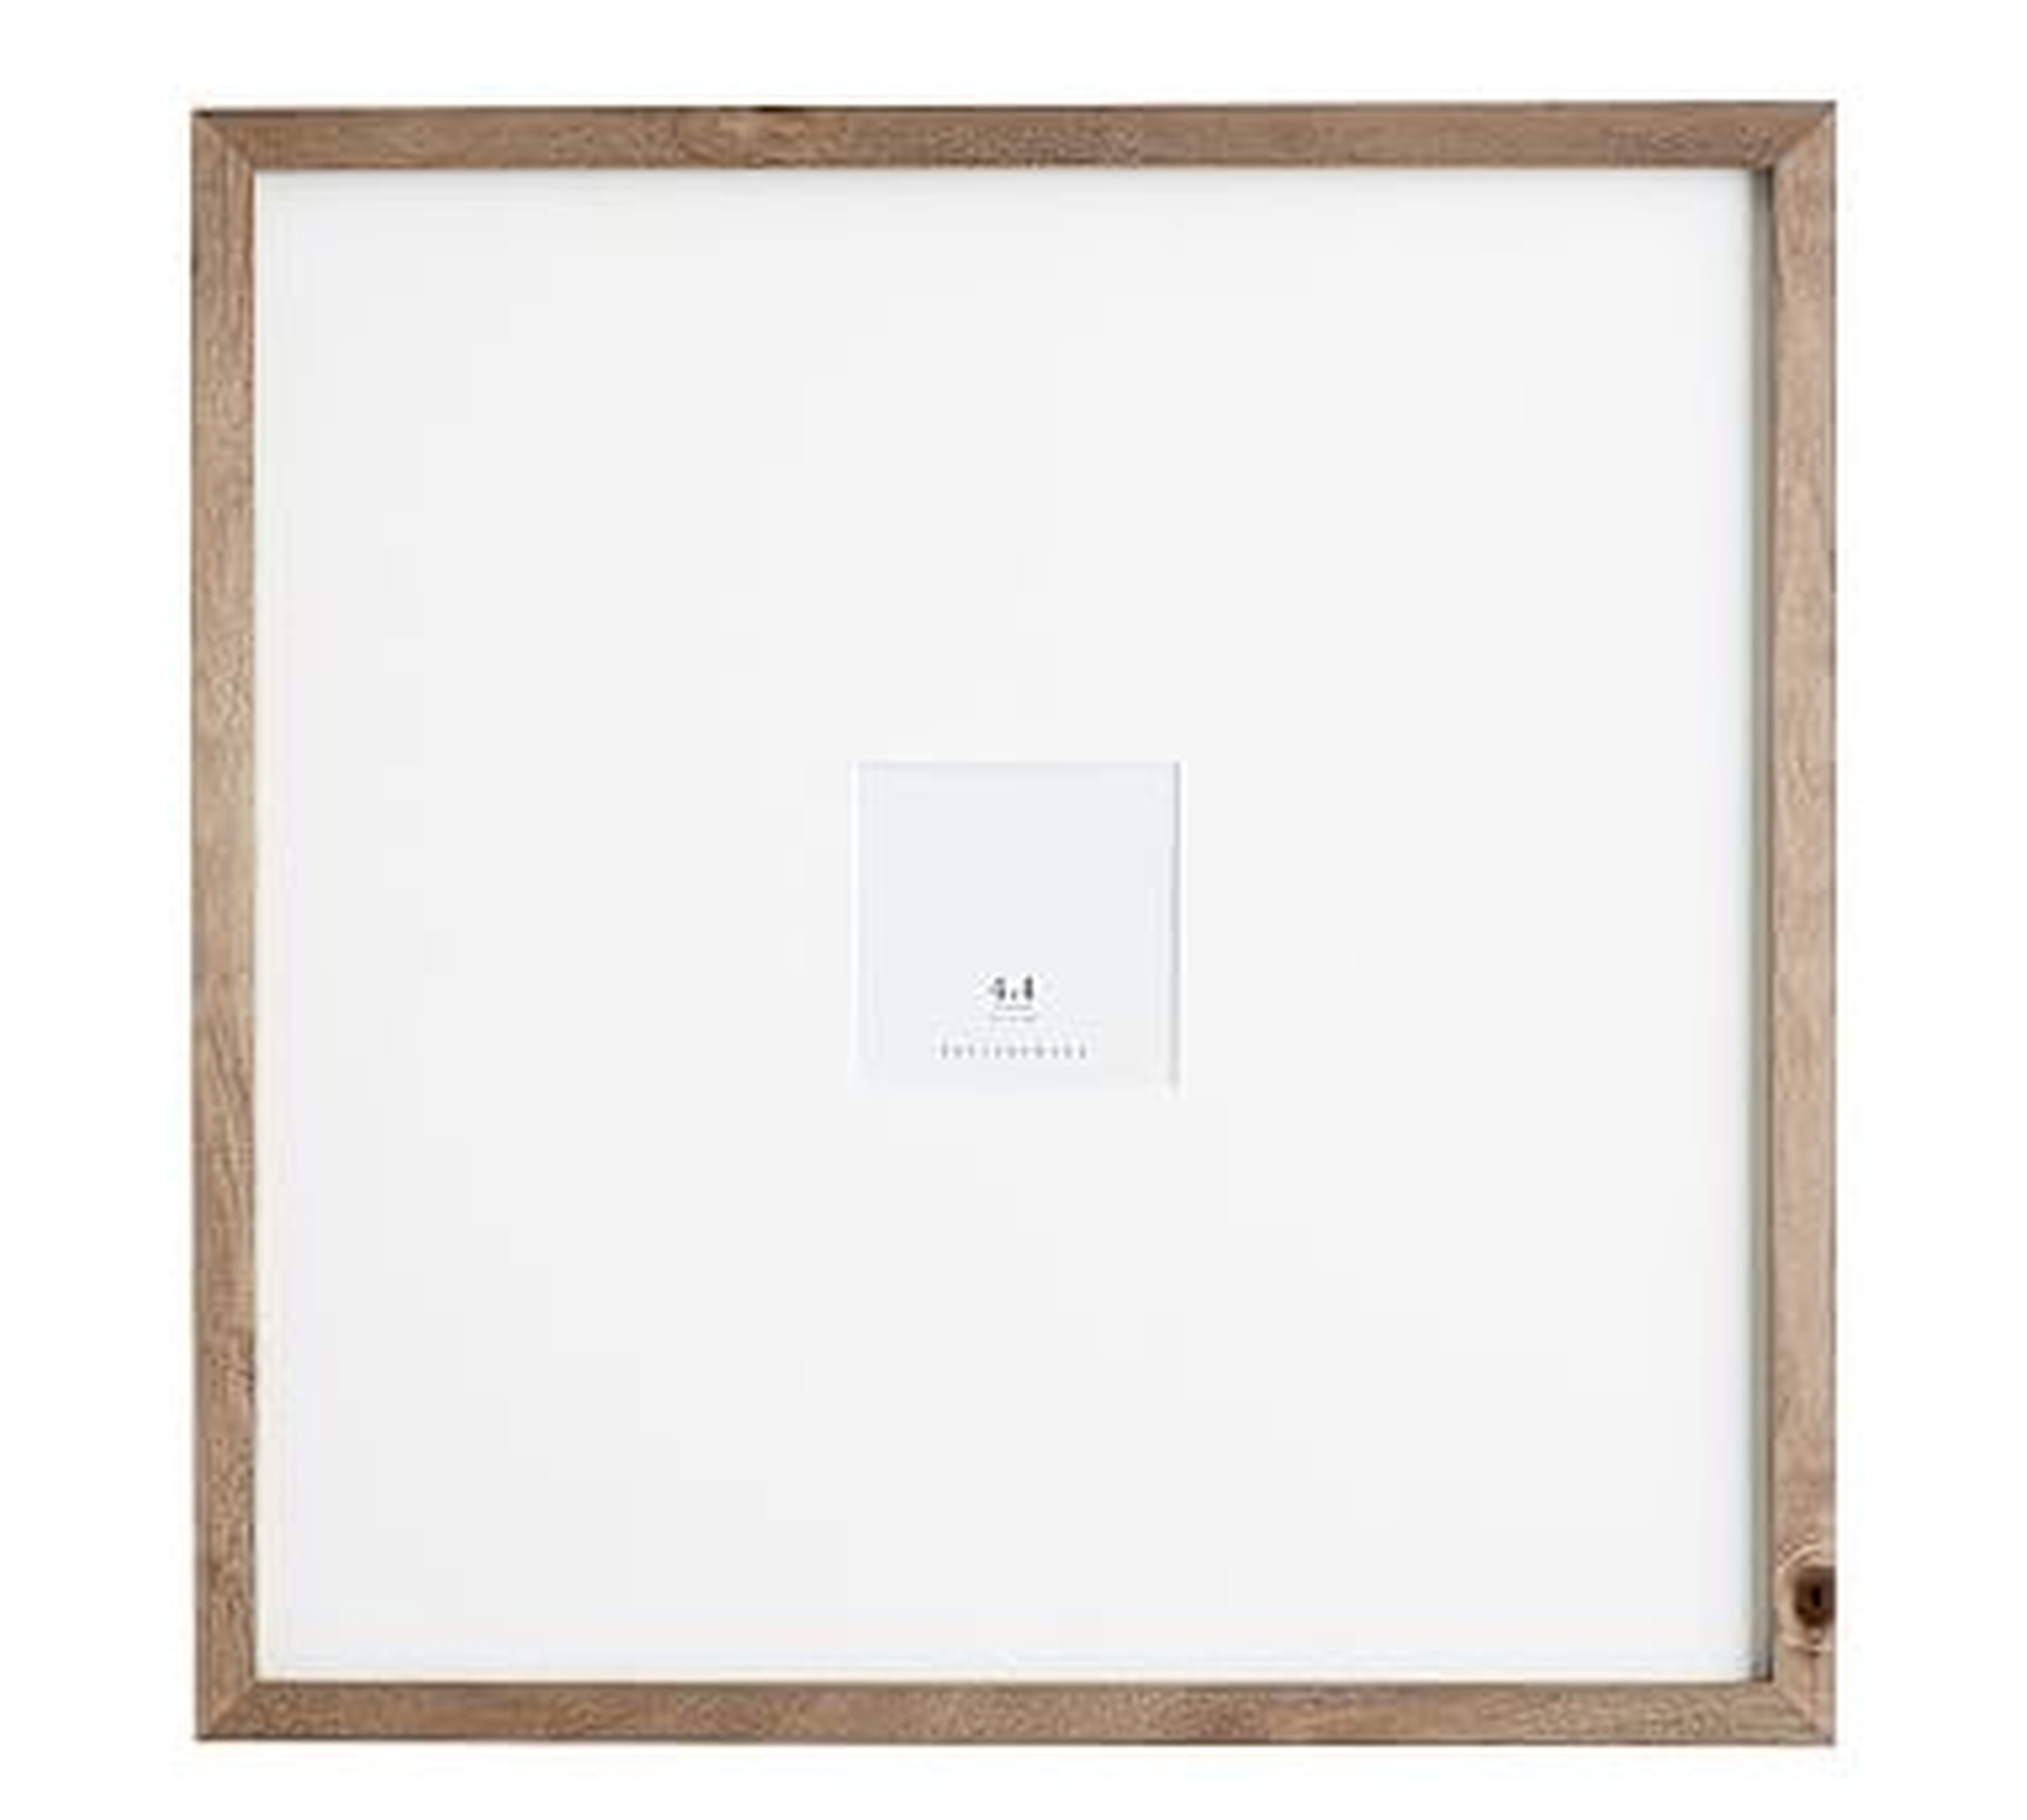 Wood Gallery Oversized Frame, 4x4 - Gray - Pottery Barn